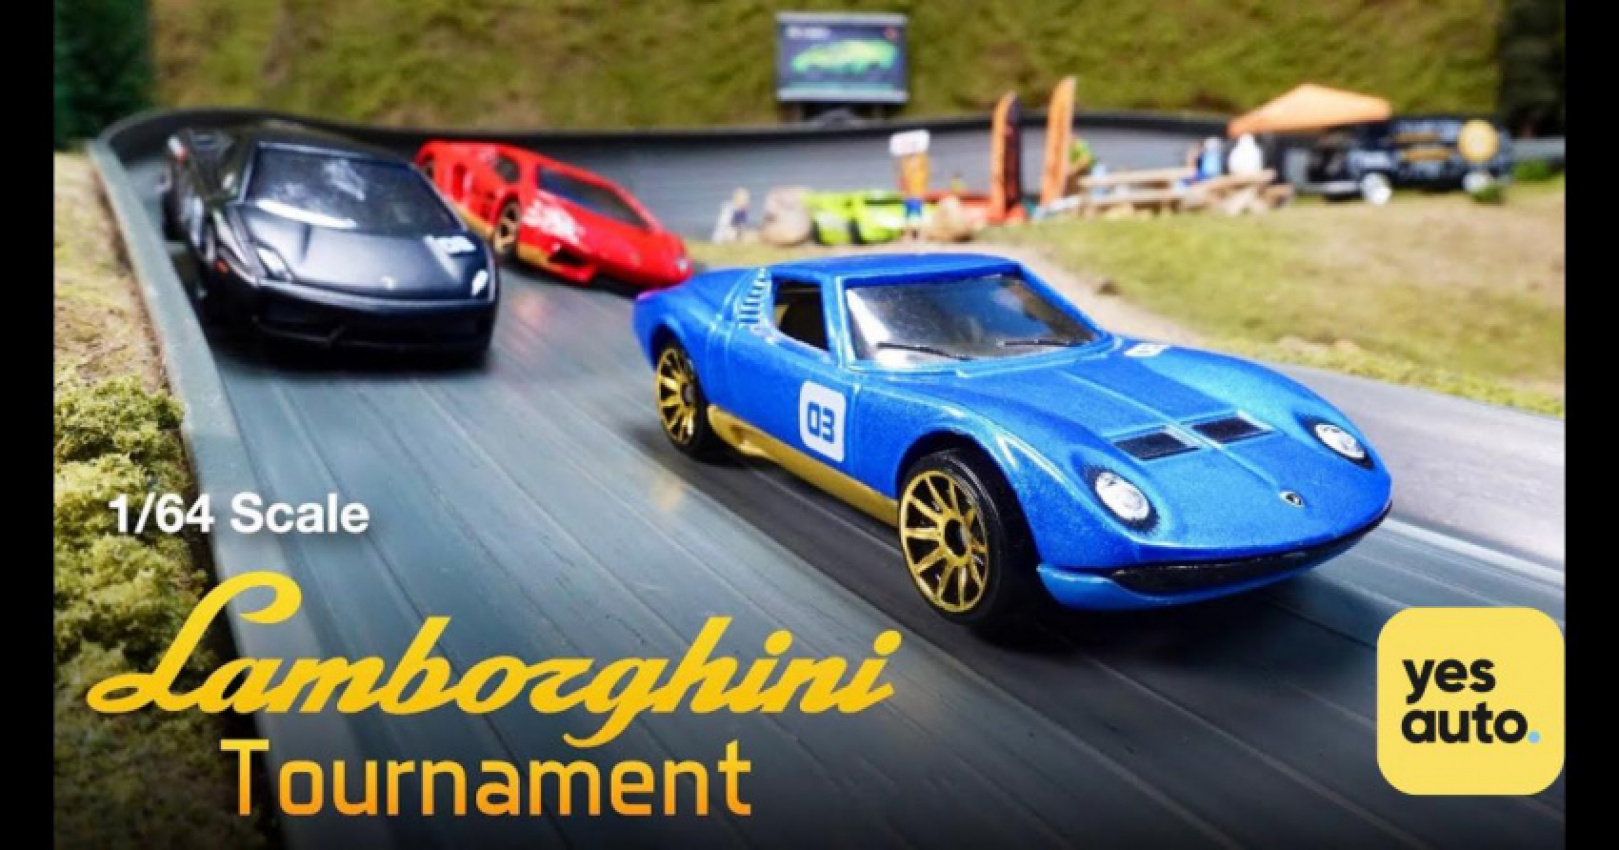 autos, cars, car news, classic car, motorsport, scale model car, diecast racing is the incredible motorsport series you’ve never heard of but need to see